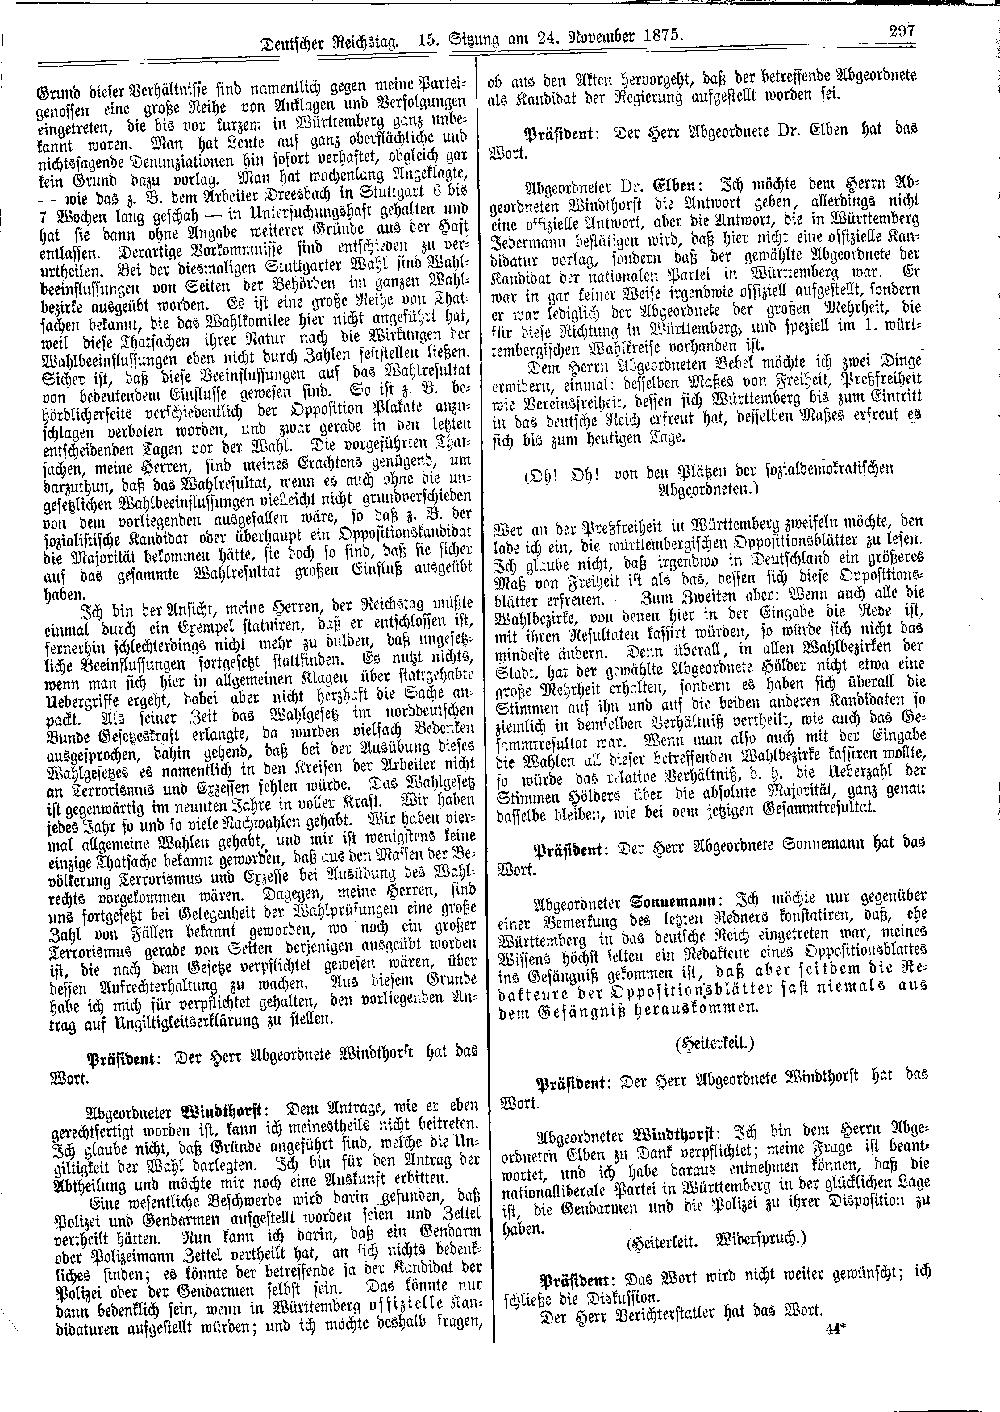 Scan of page 297